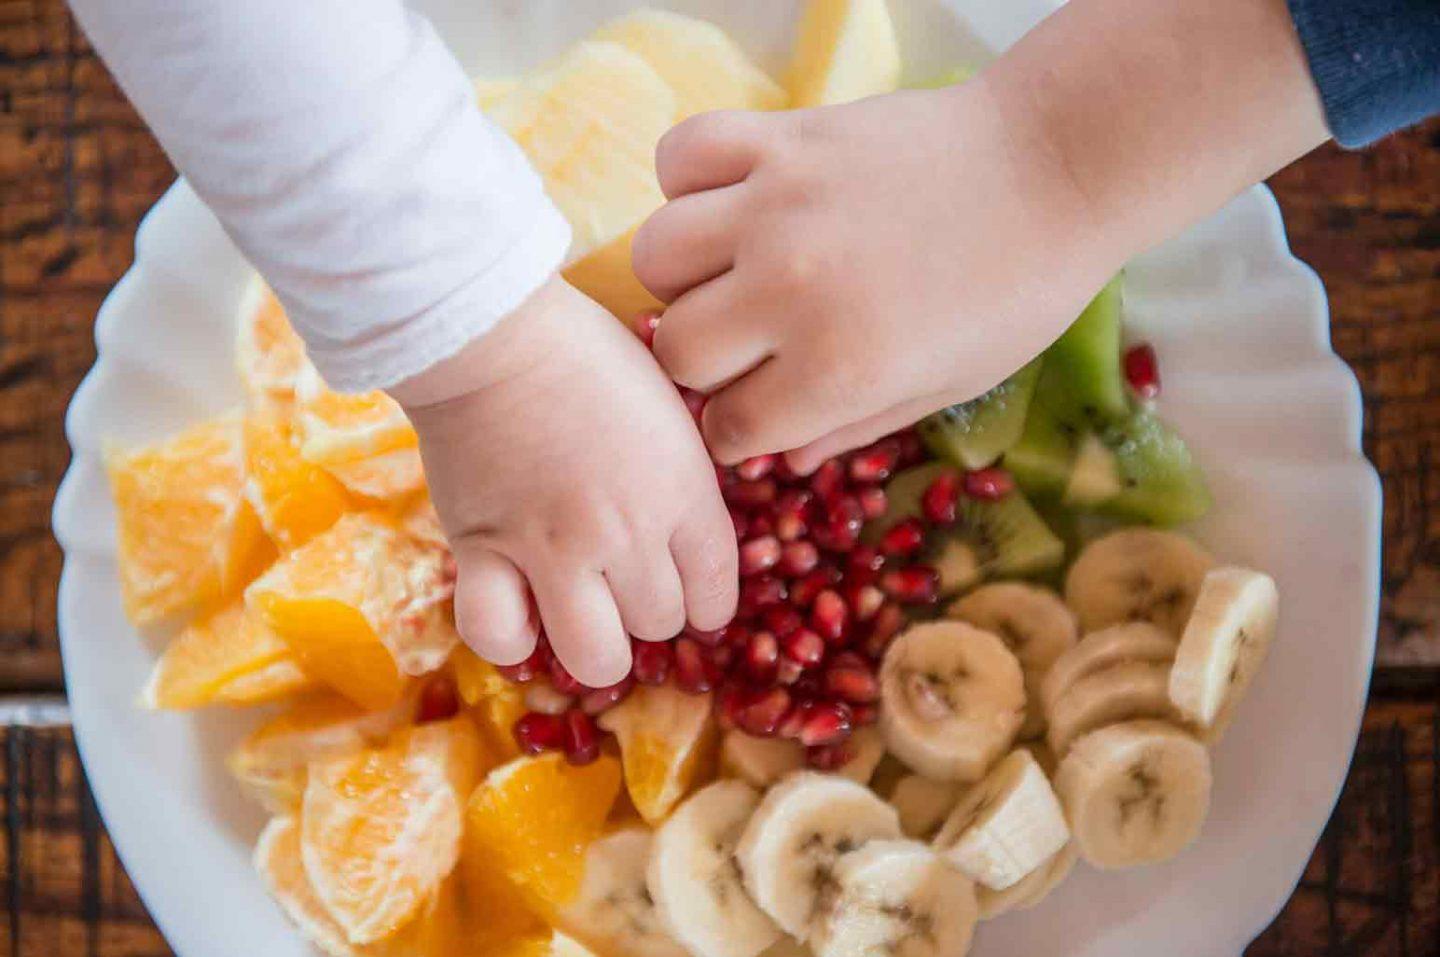 Healthy and Nutritious Snacks for Kids